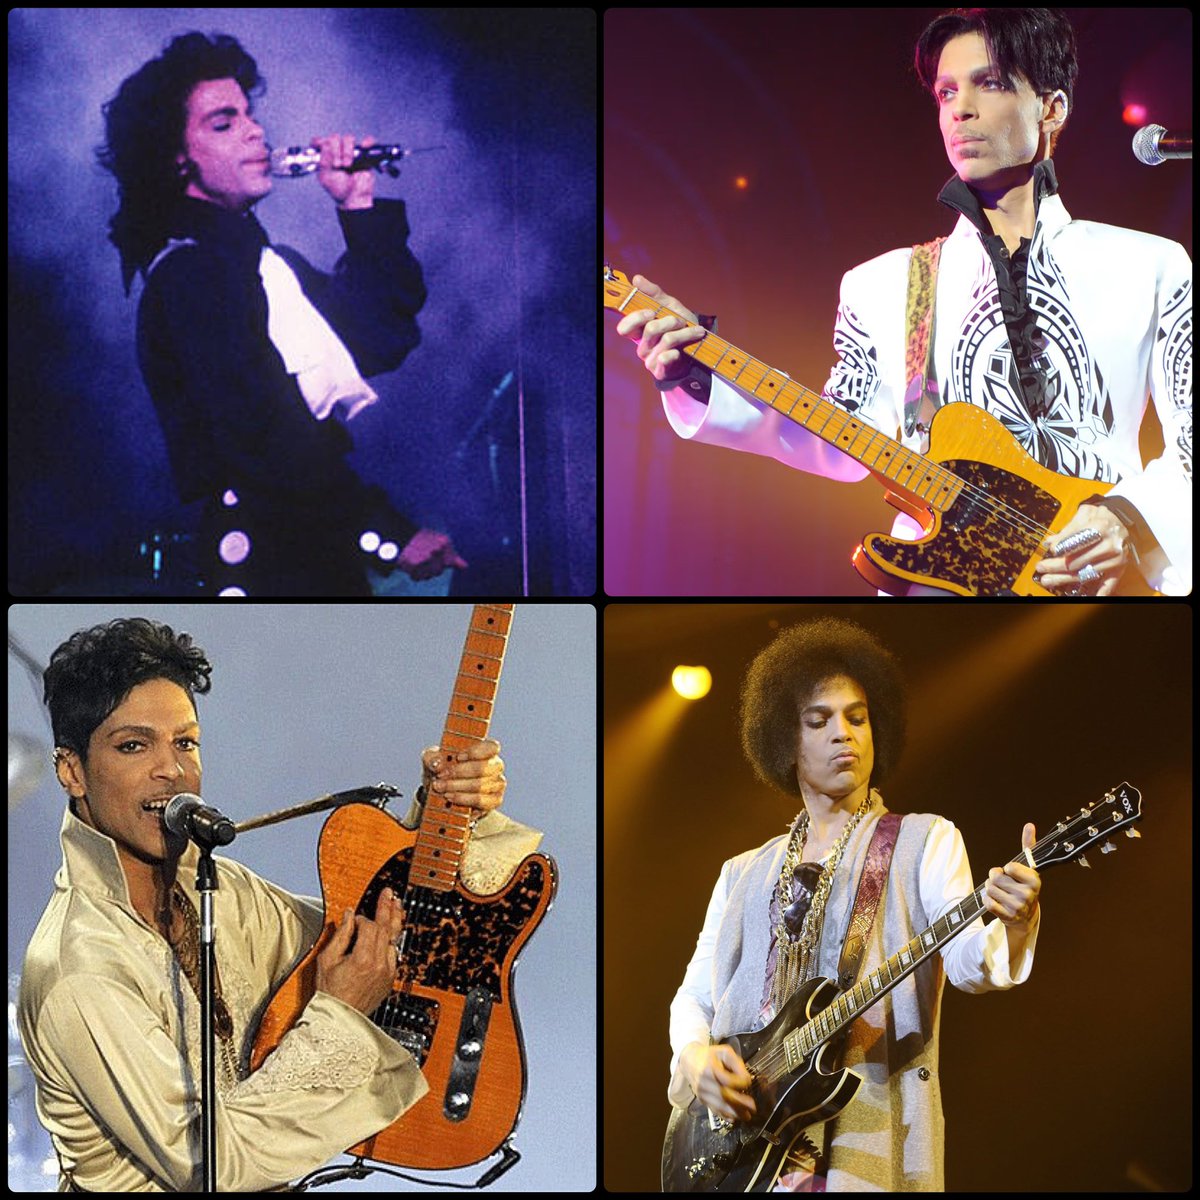 Remembering the musical legacy of @Prince on the 8th anniversary of his passing. The UK was blessed to see so many of his performances, and I was lucky to witness a good number of them. Never to be forgotten #Prince #Prince4Ever 🎼💜🎶